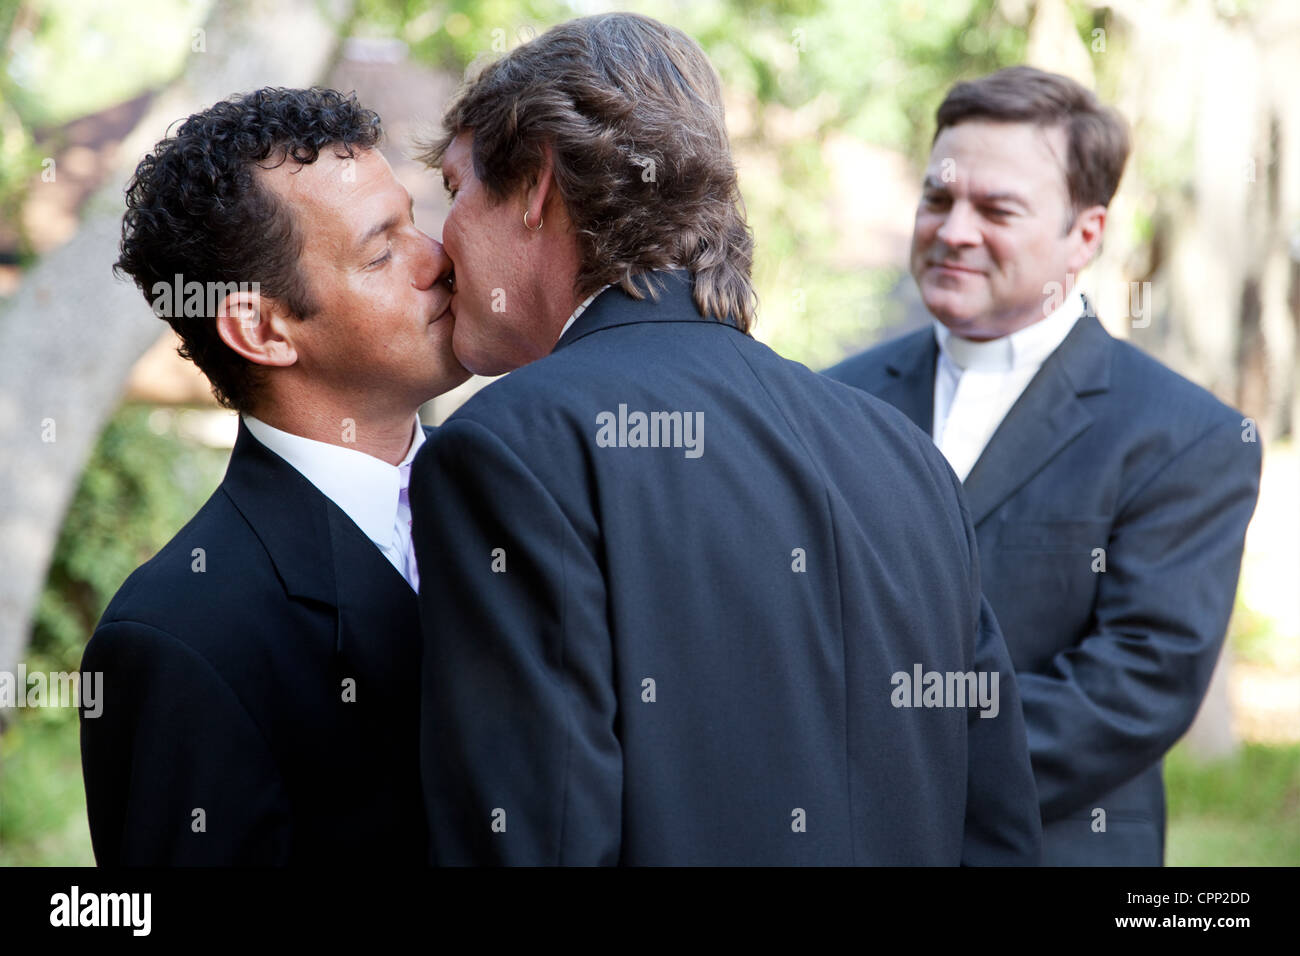 Wedding of handsome gay male couple. The grooms kiss as the minister looks on.  Stock Photo